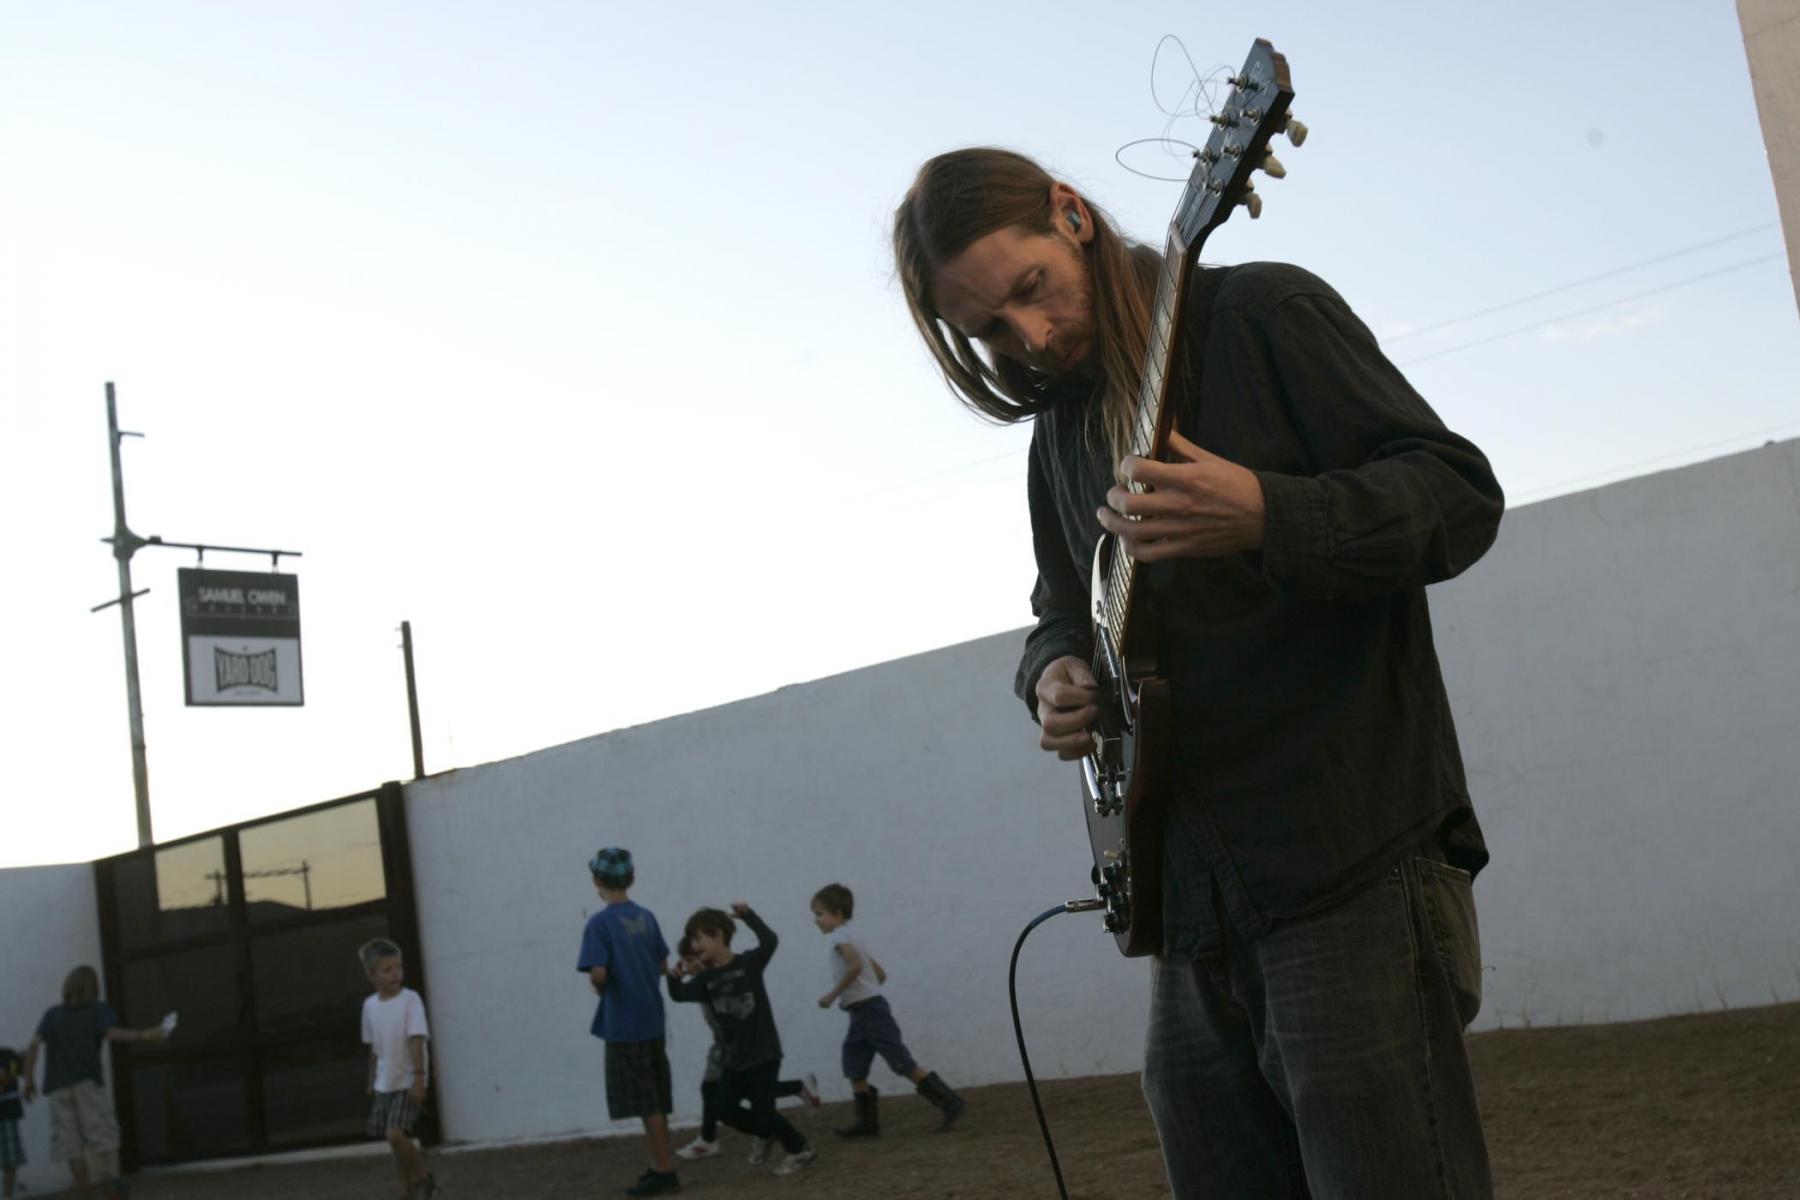 Mick Barr playing at the AutoBody opening, 30 September 2011. Photo by Alberto Tomas Halpern.